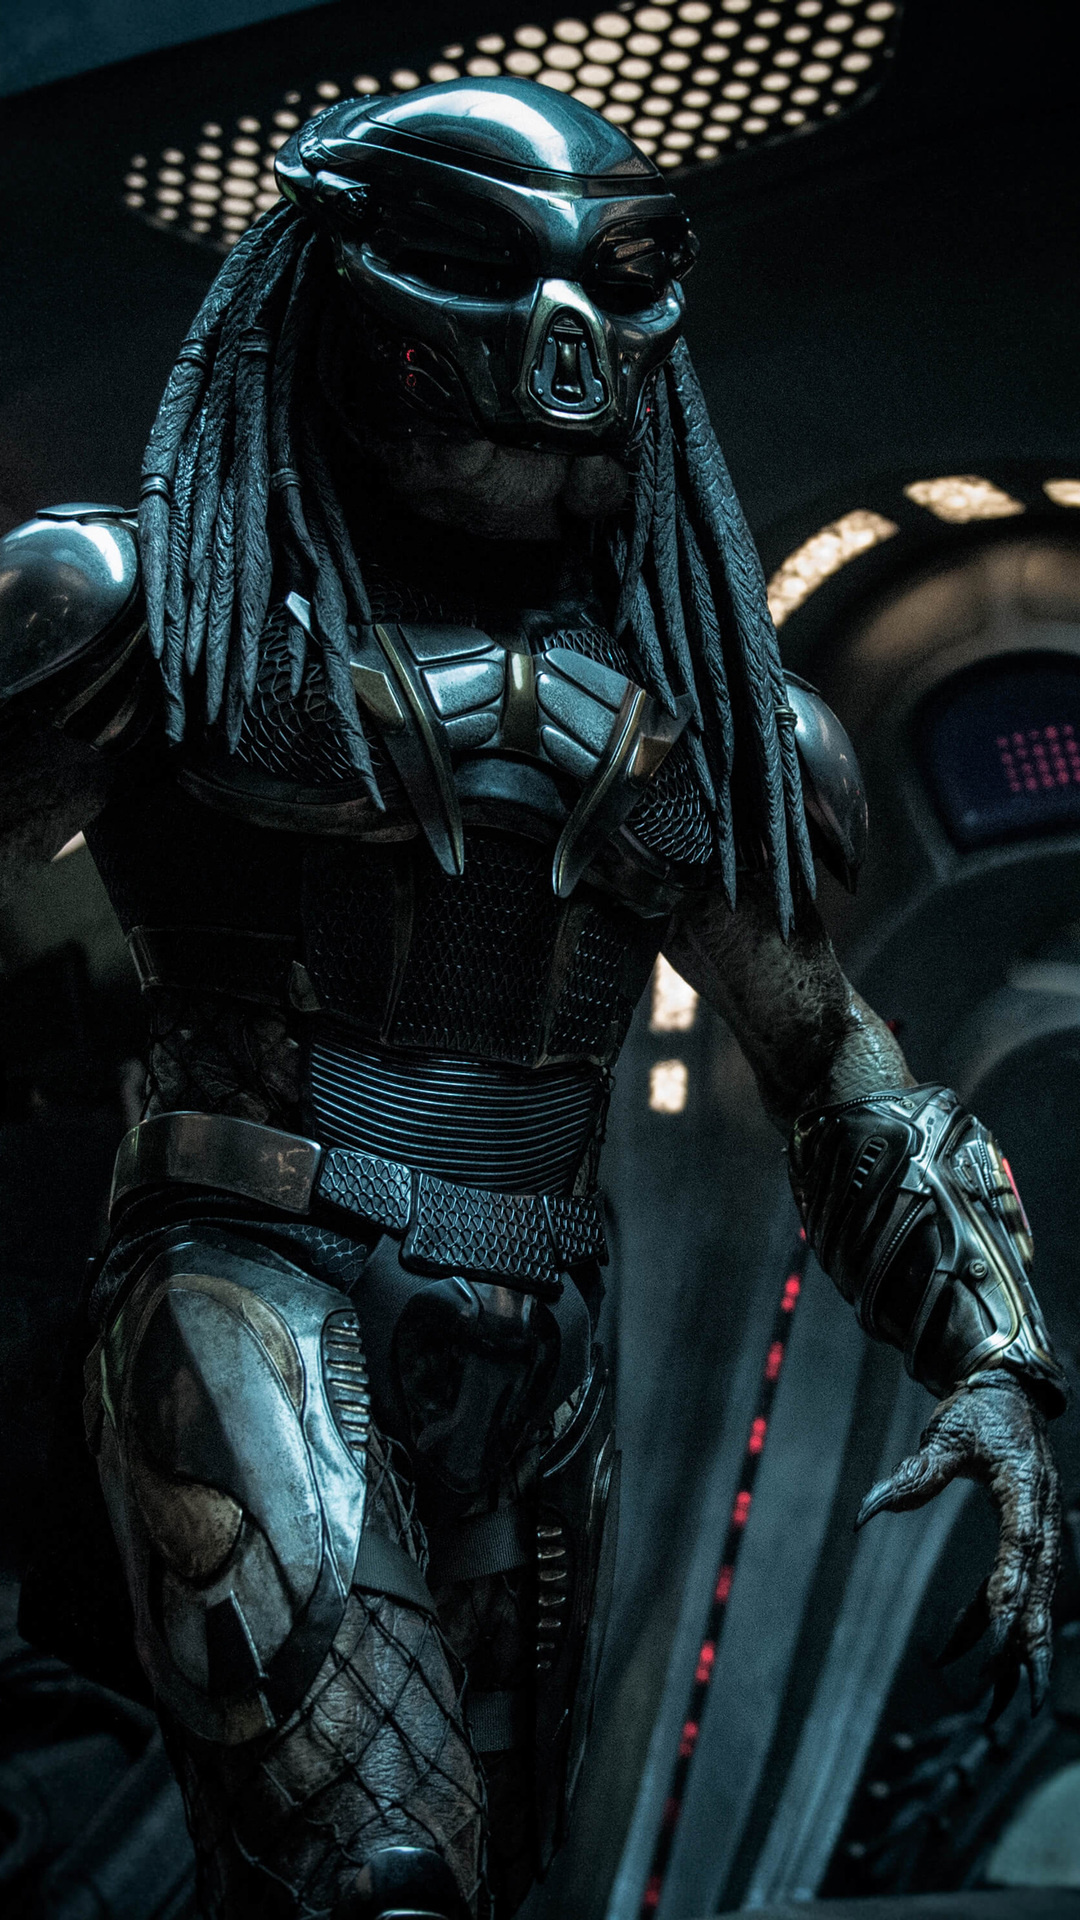 Predator: The film was theatrically released in the United States on September 14, 2018. 1080x1920 Full HD Wallpaper.